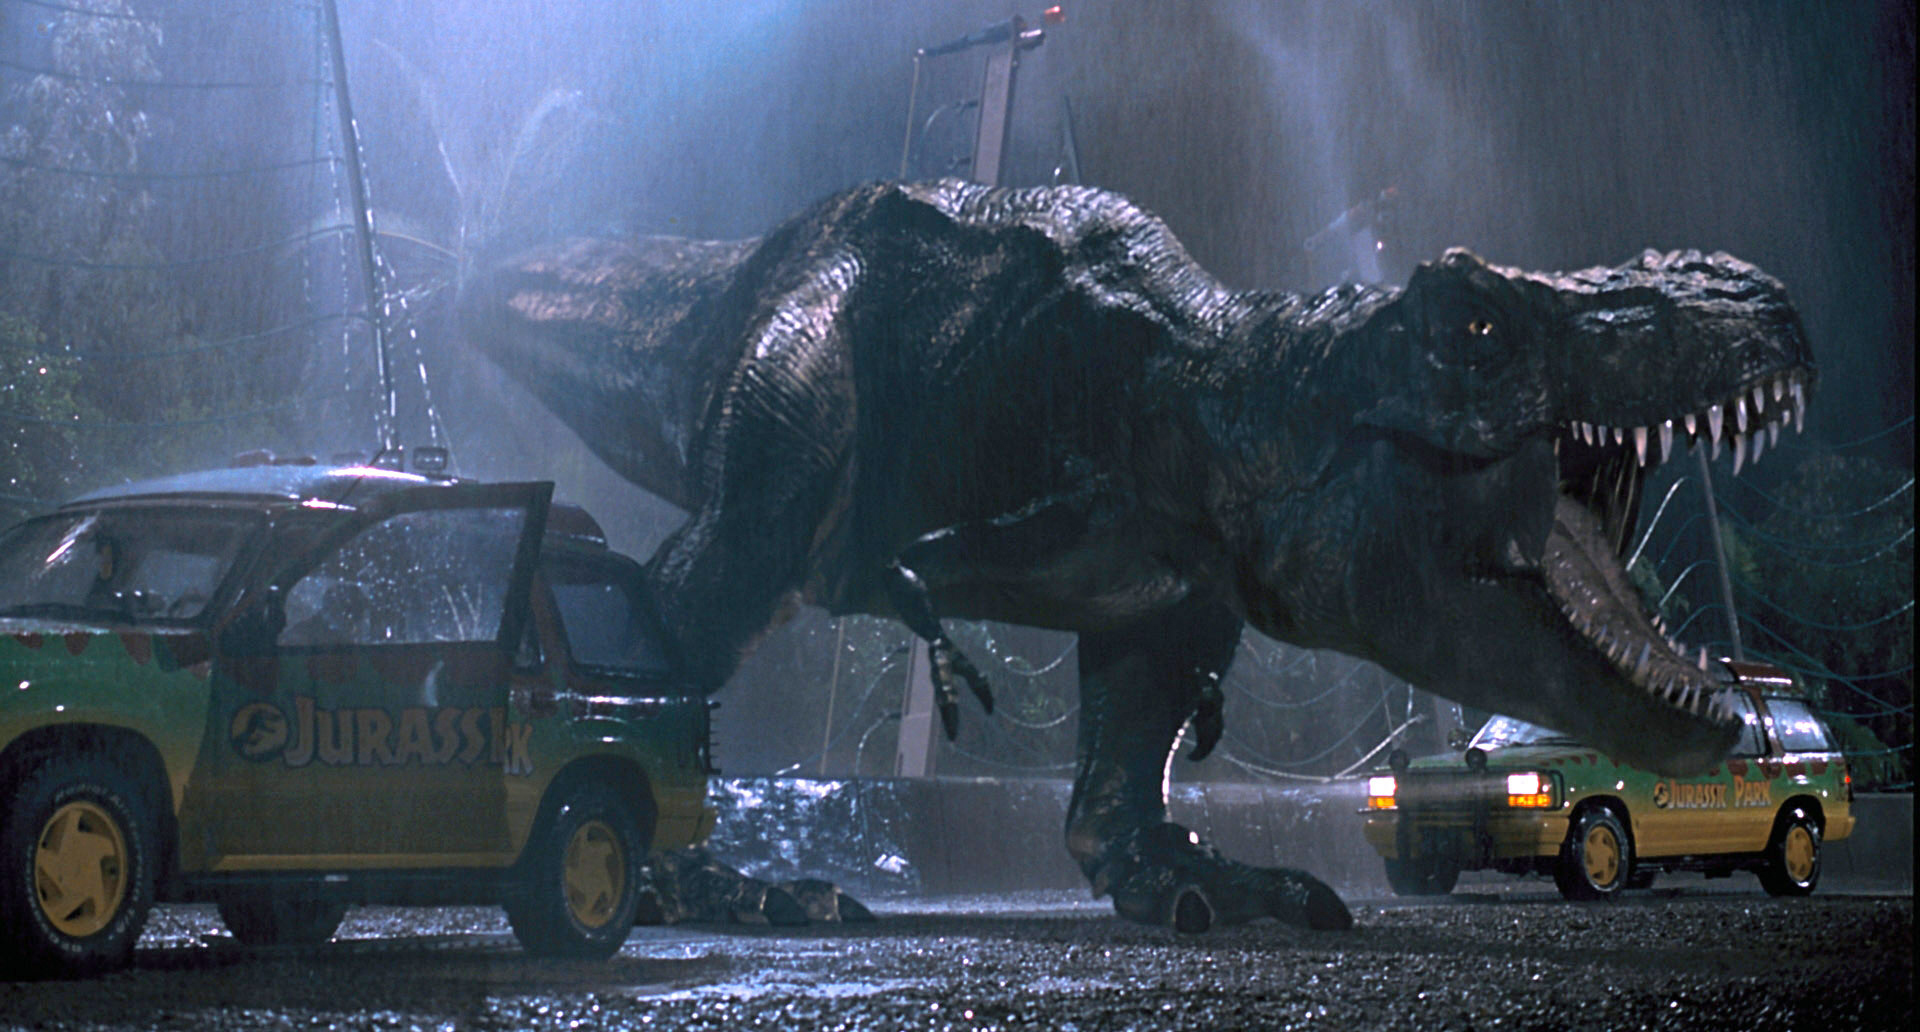 photo from the 1993 movie "Jurassic Park." It depicts the T. rex attacking two of the Jurassic Park tour trucks as it breaks through a fence, roaring, at night during a rainstorm.